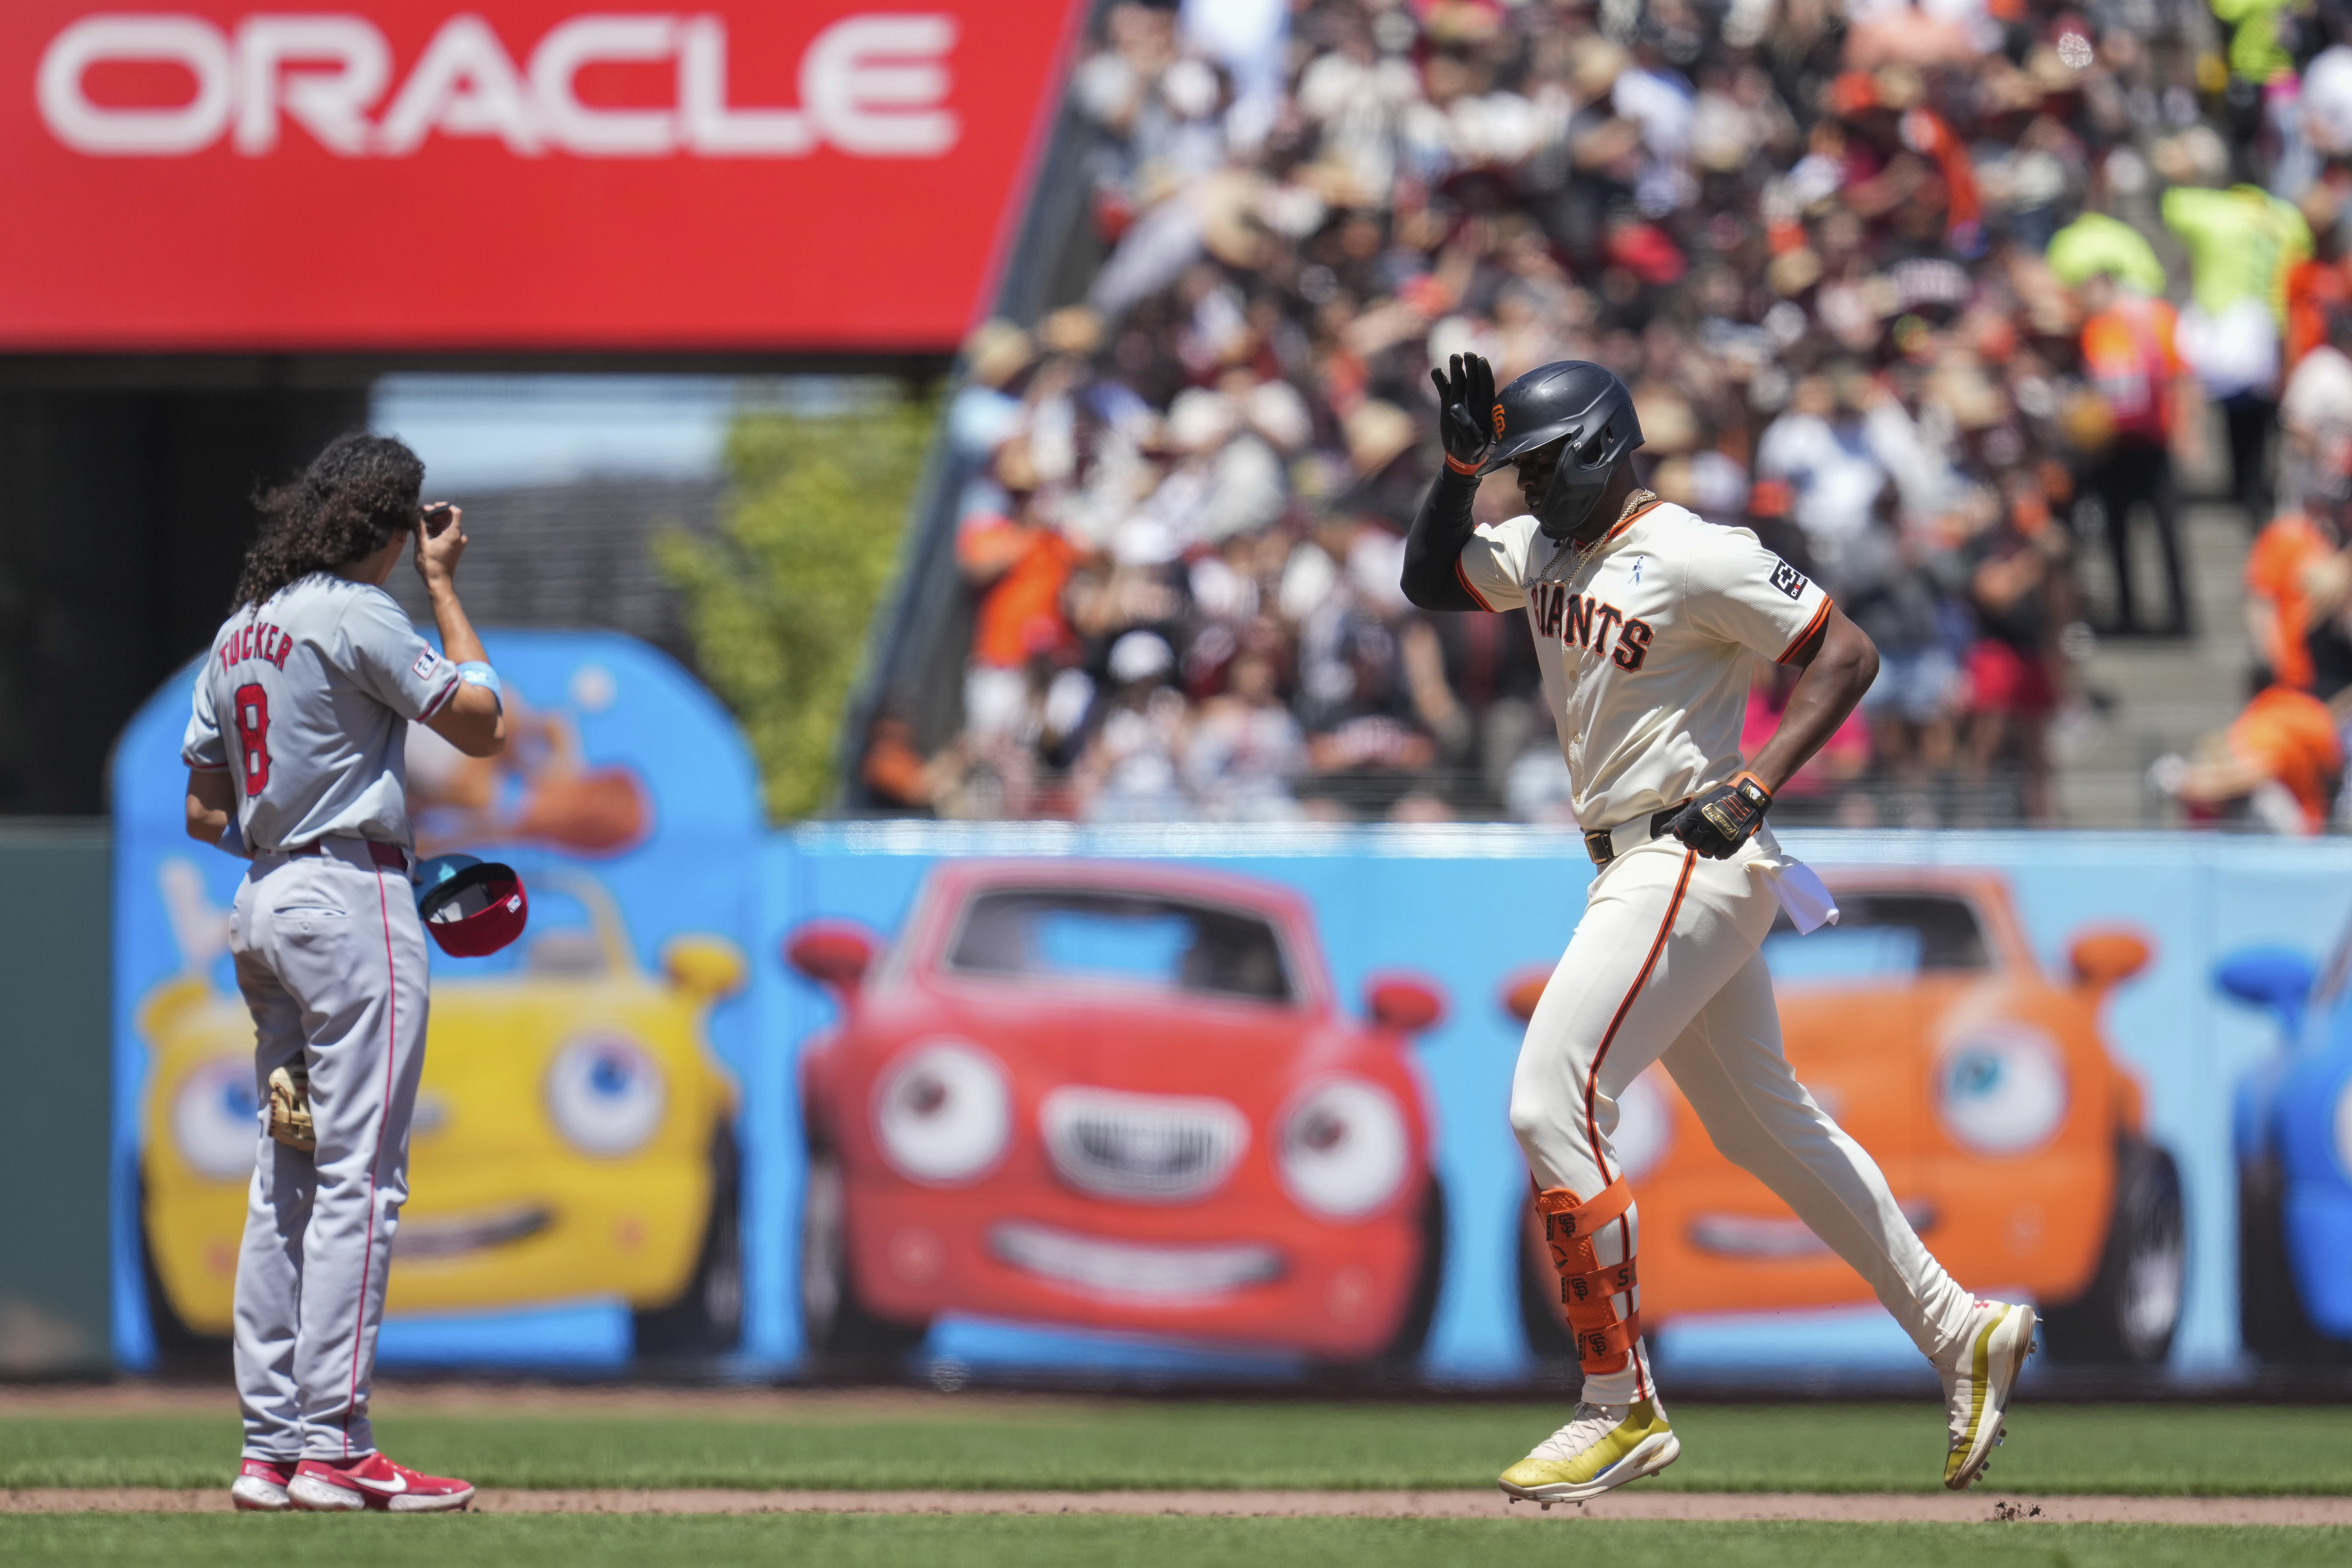 Jorge Soler's 3-run homer keys a 9-run inning that leads the Giants past the Angels 13-6